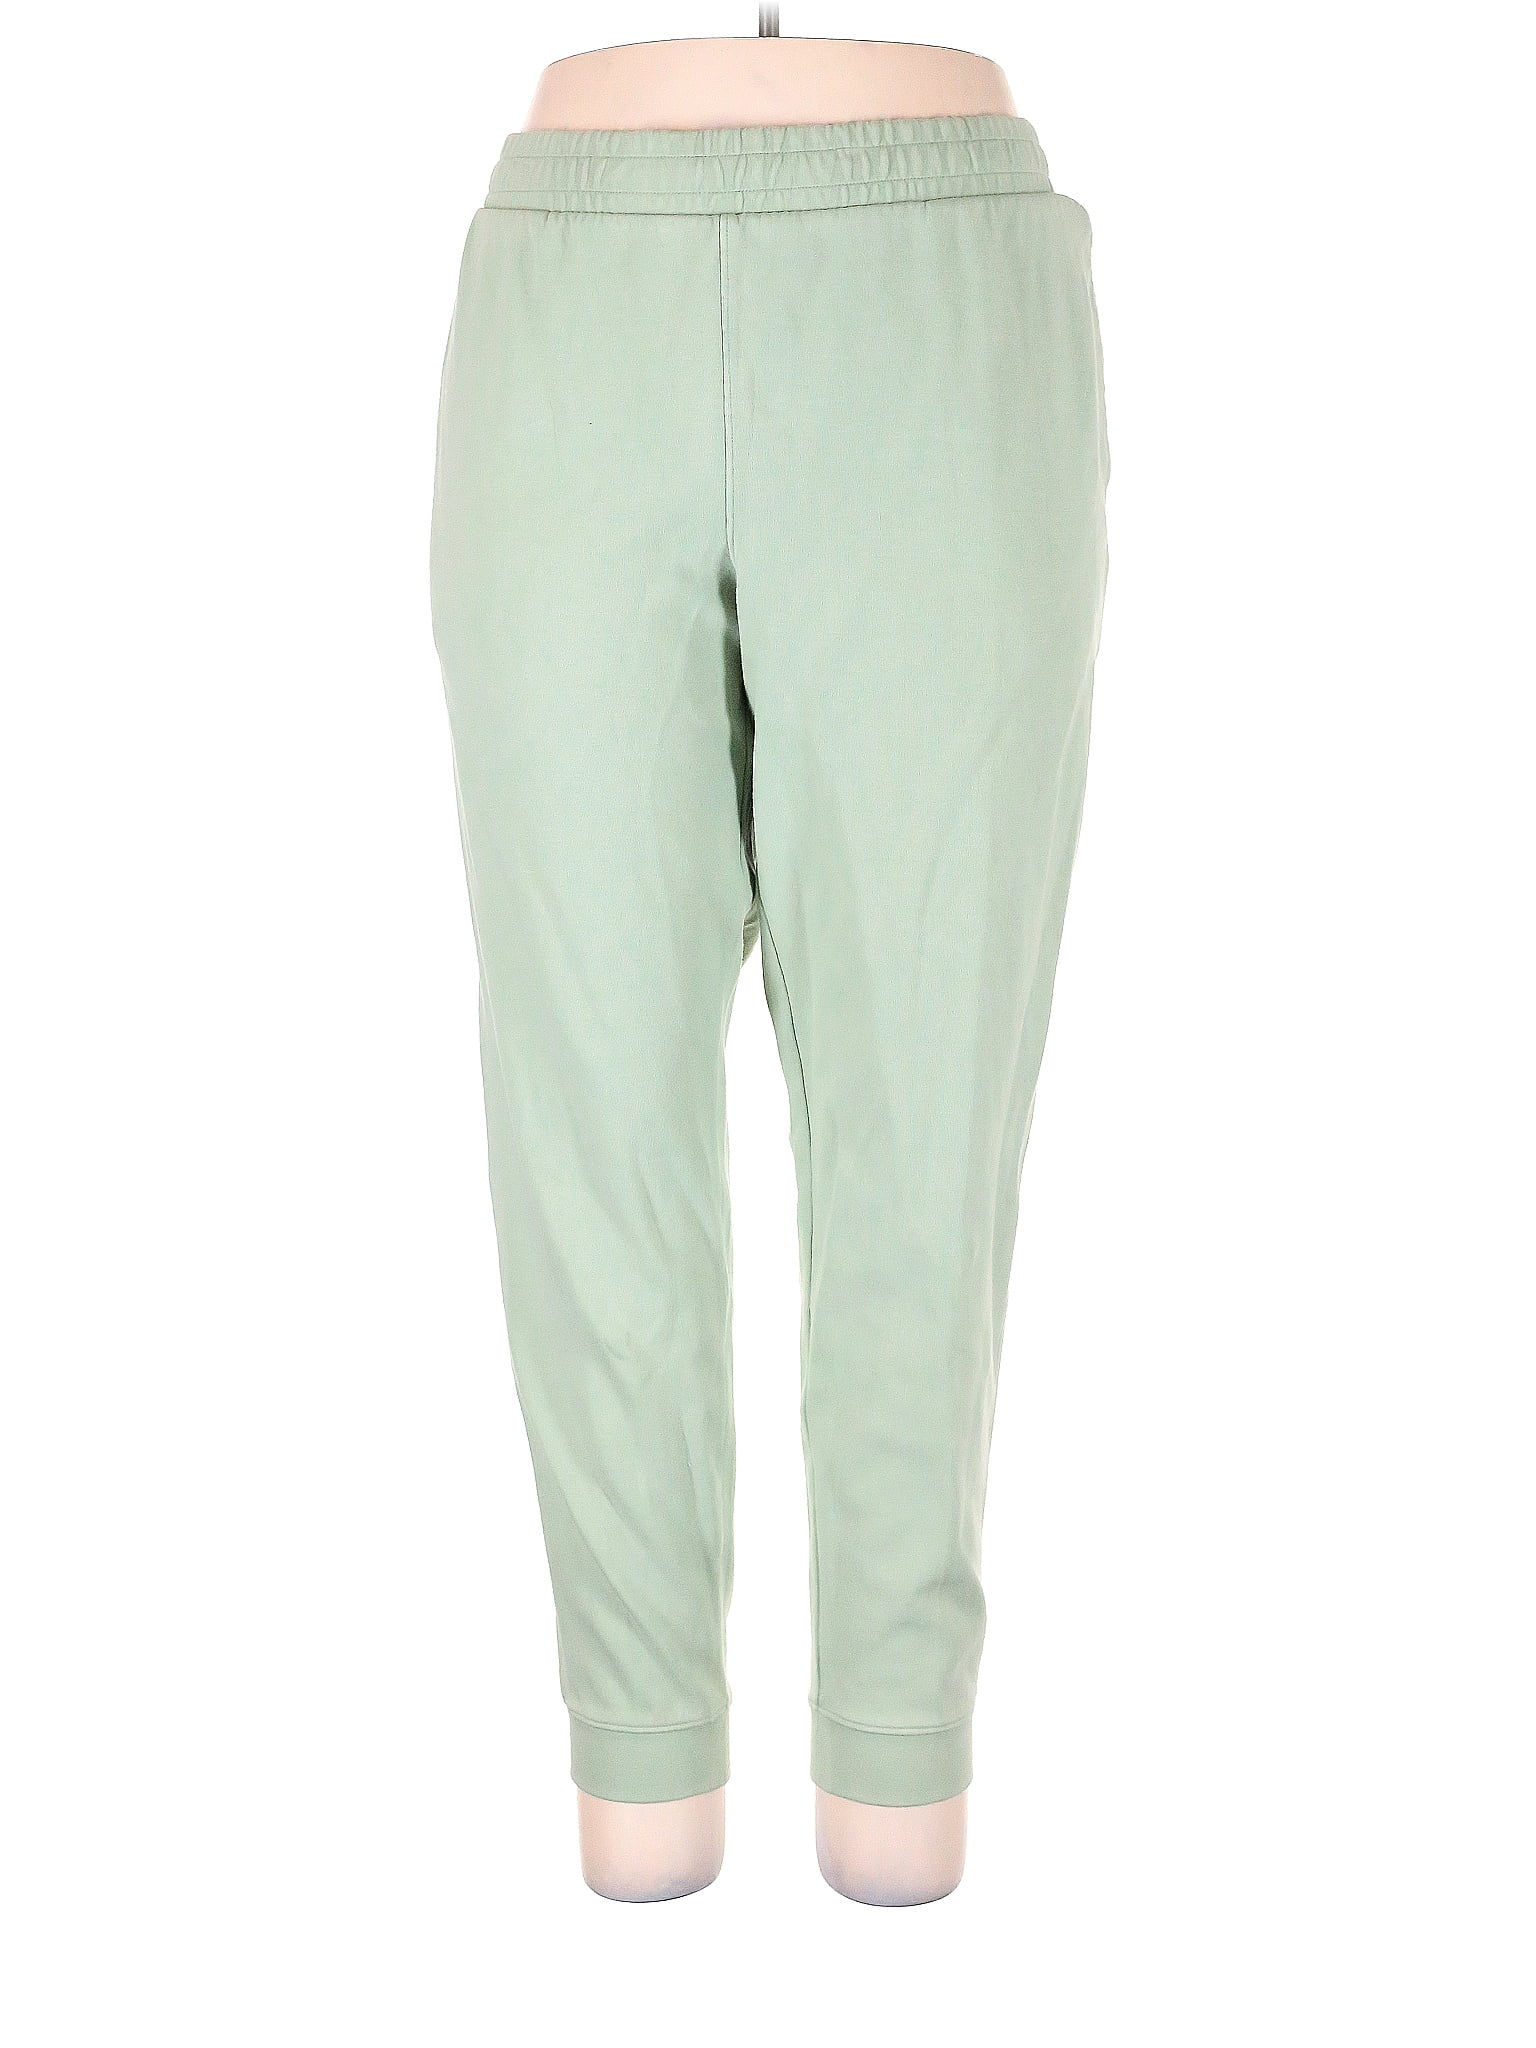 all in motion Solid Green Sweatpants Size XL - 37% off